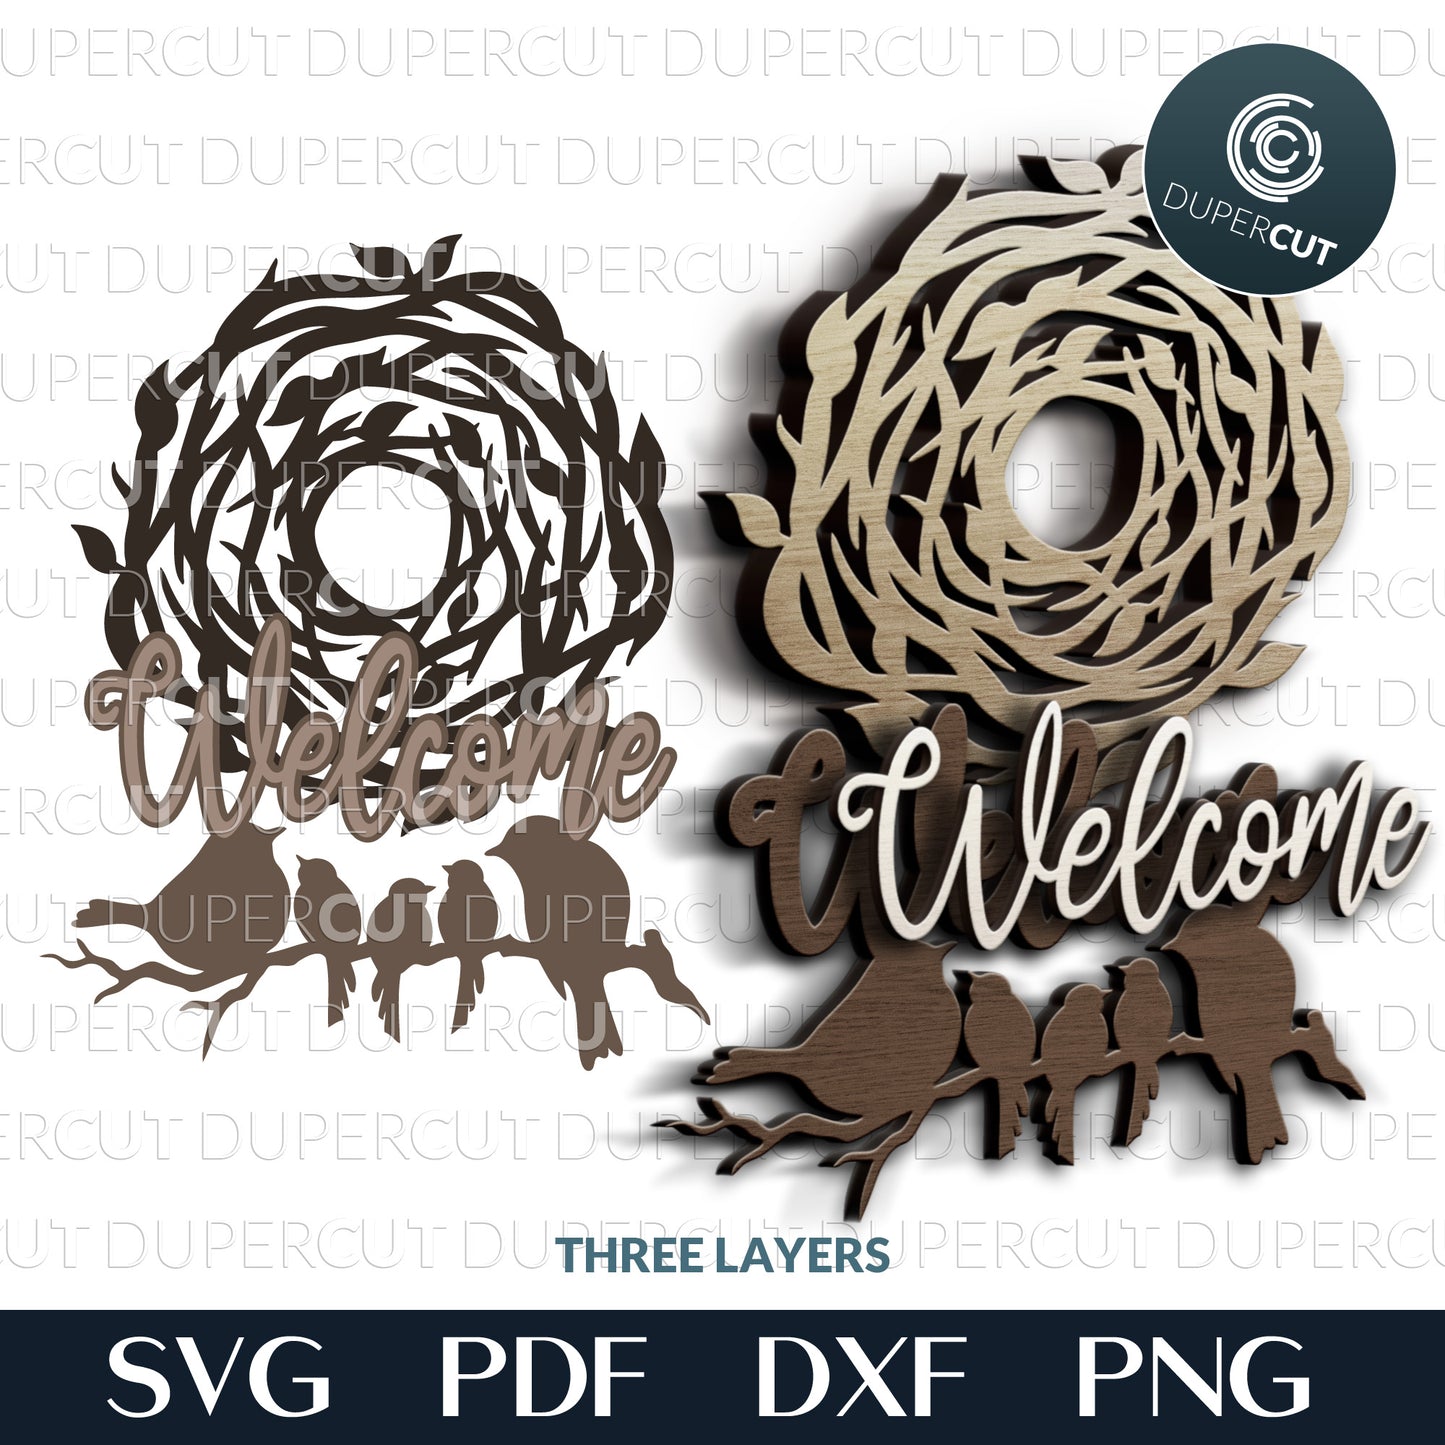 Birds nest welcome sign - layered laser cutting files SVG PDF DXF templates for commercial use. Glowforge, Cricut, Silhouette Cameo, CNC plasma machines